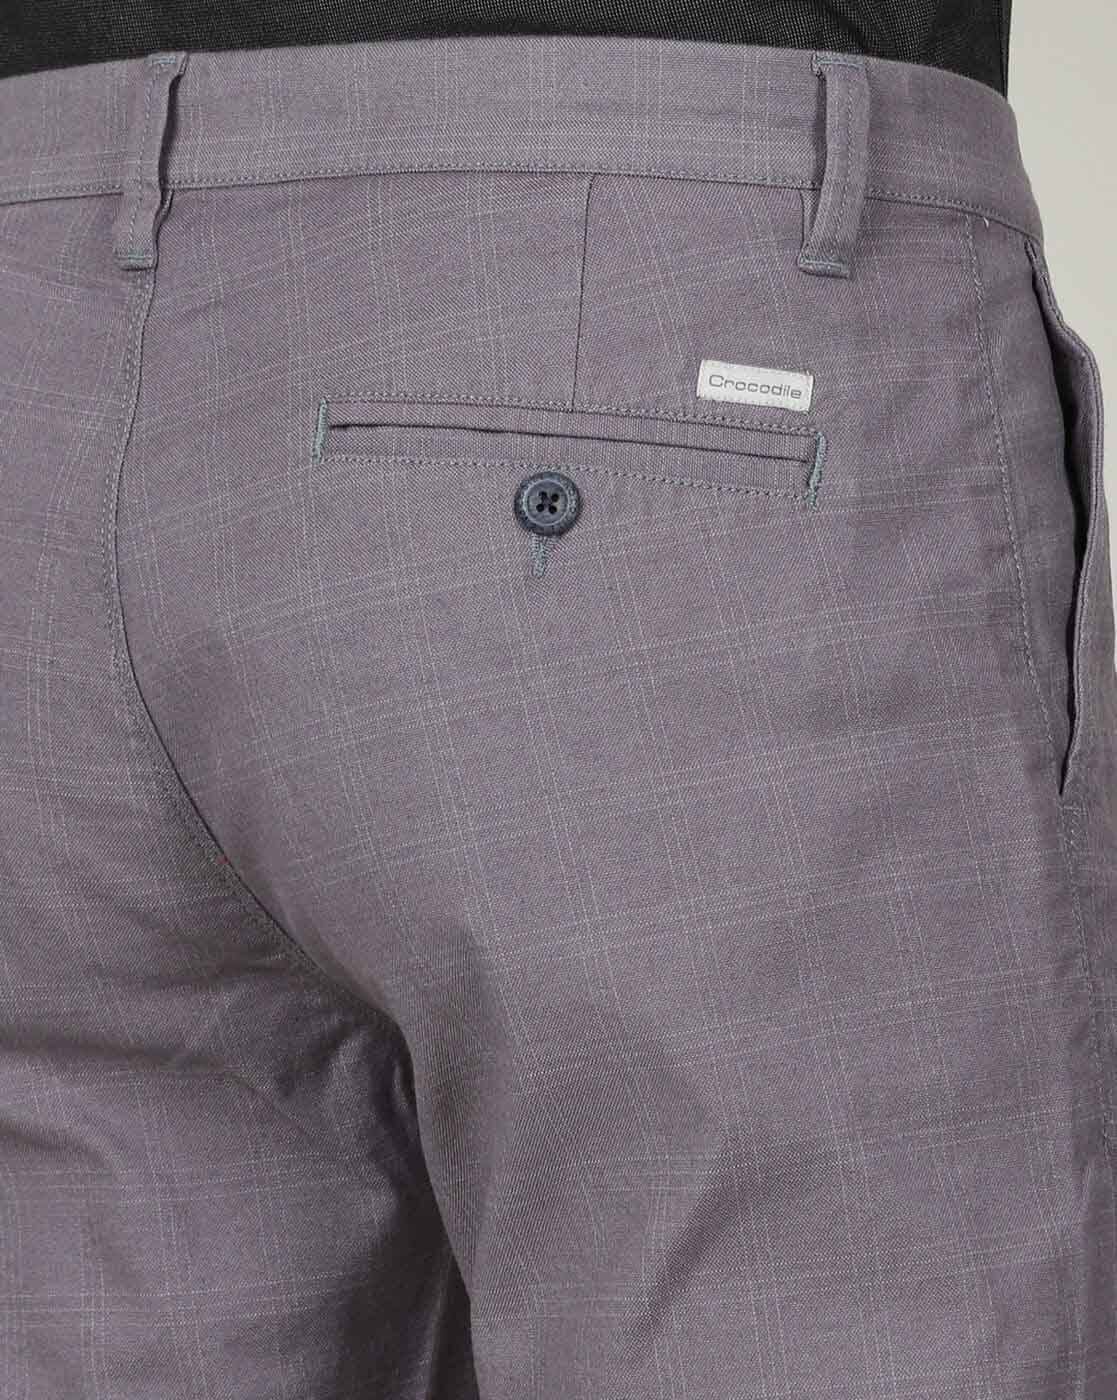 Authentic Crocodile Size 34 Chino Pants Trousers Pleated Cotton Green Brown  | eBay